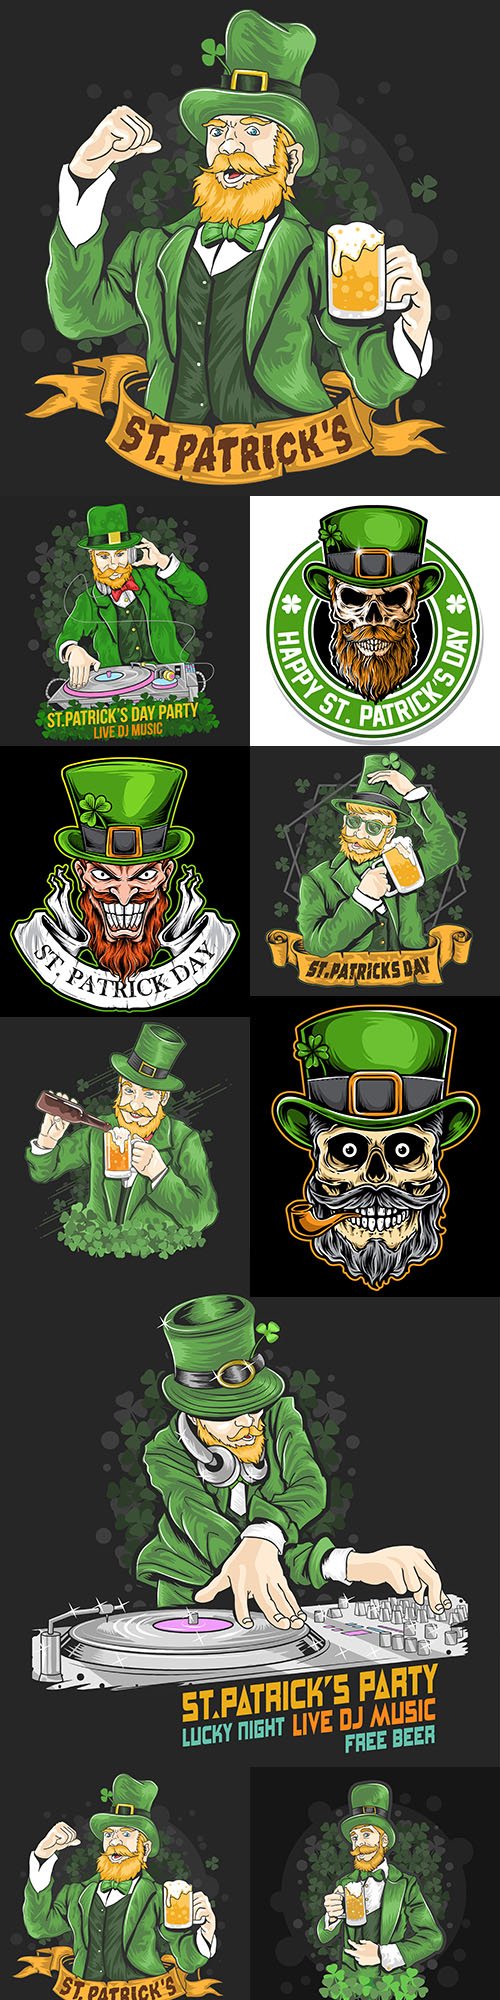 St. Patrick 's Day beer party design illustrations